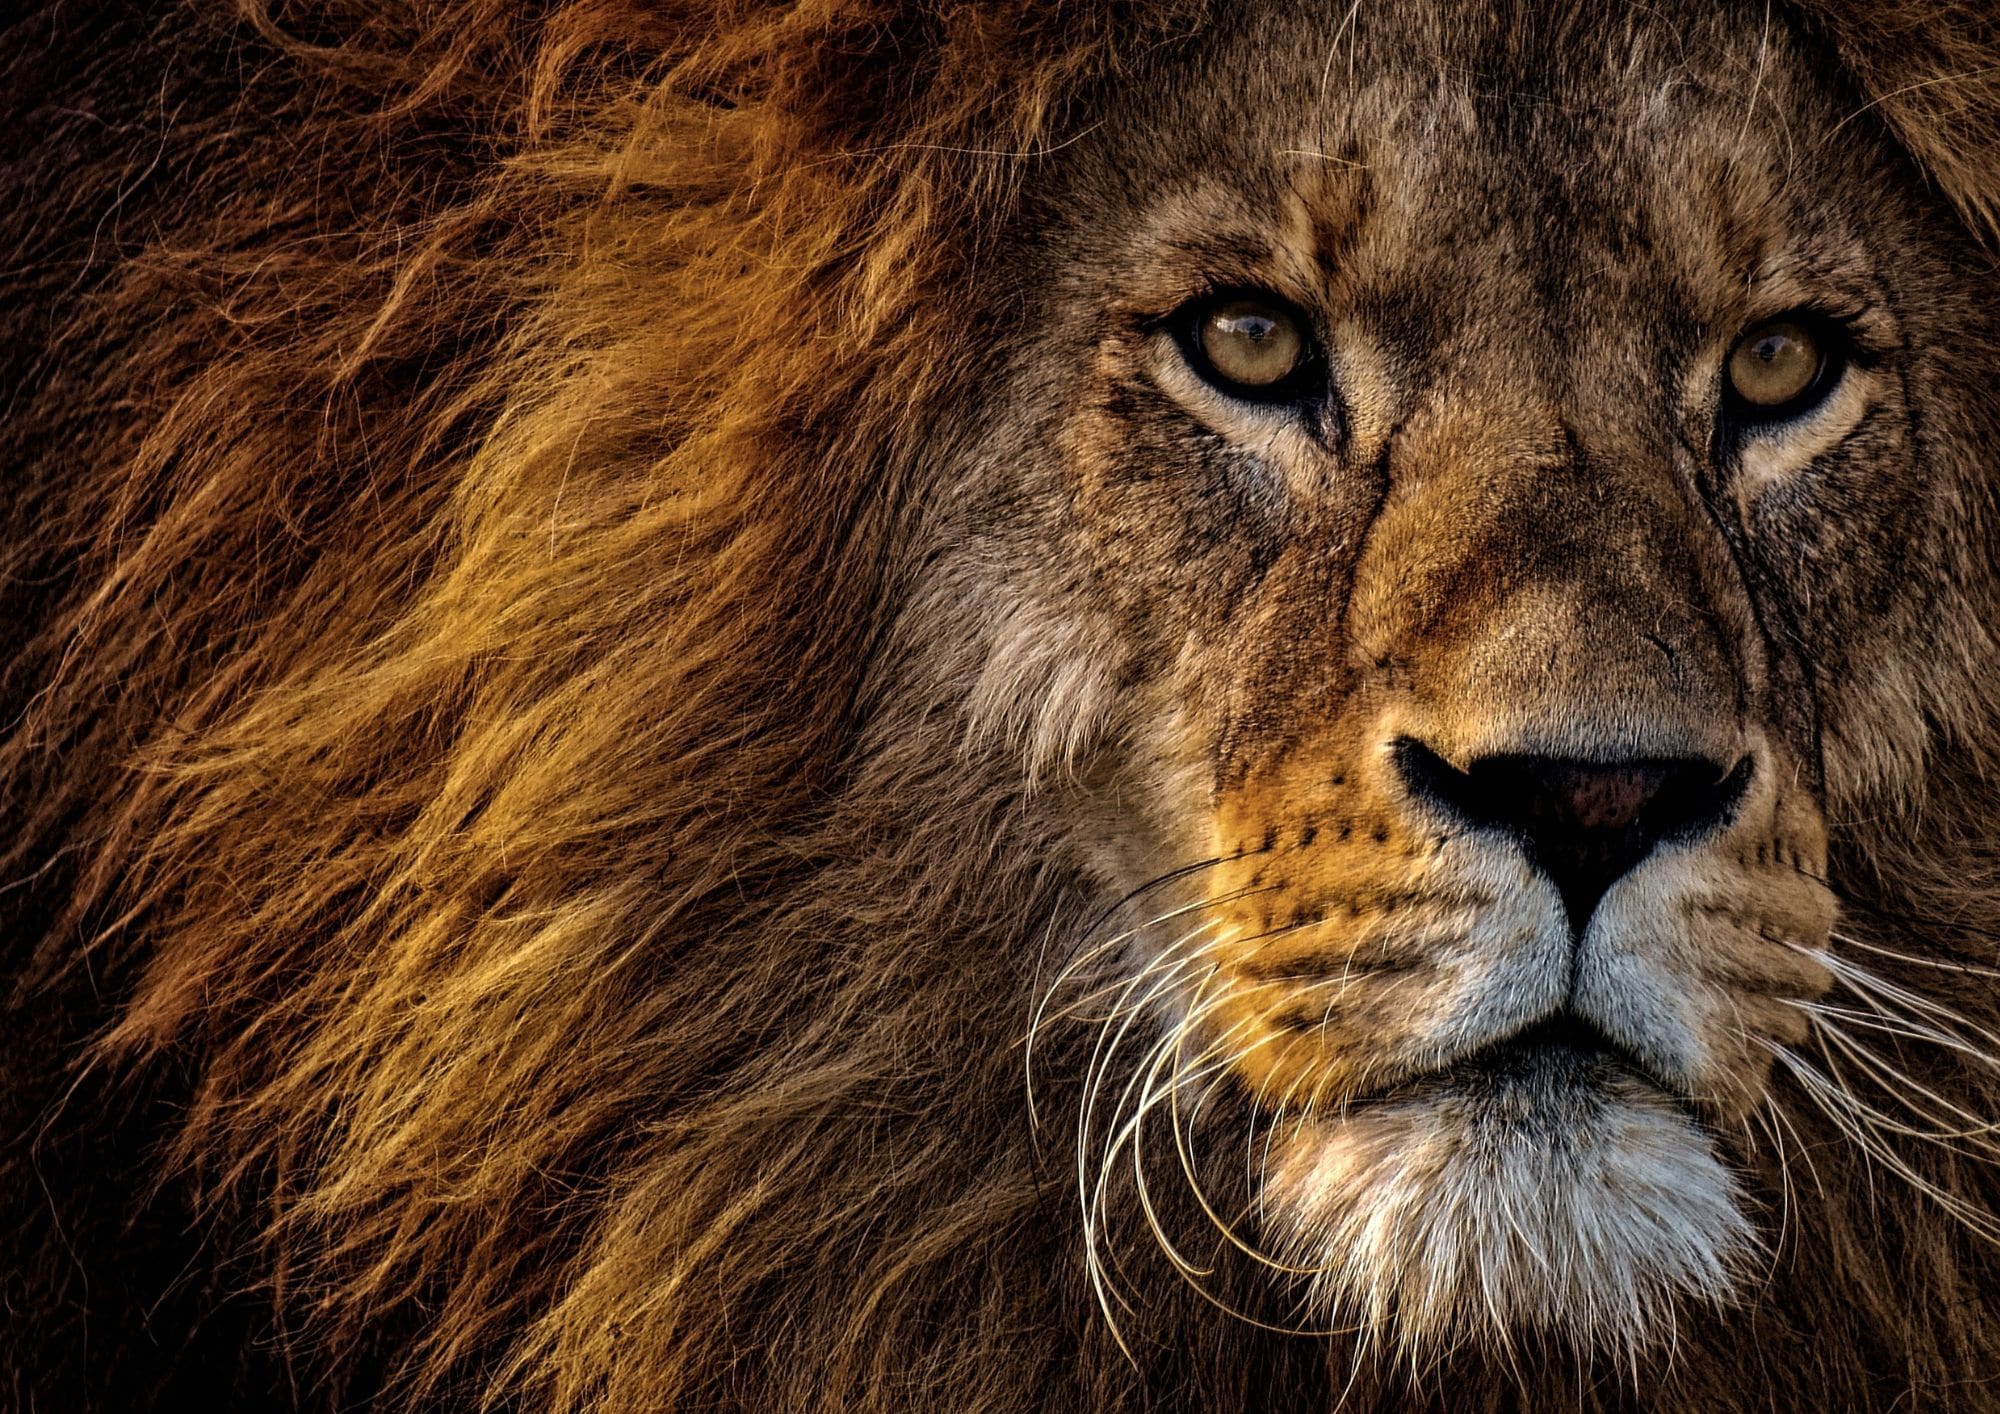 A close-up photo of an intense looking lion who stares dramatically in the distance.